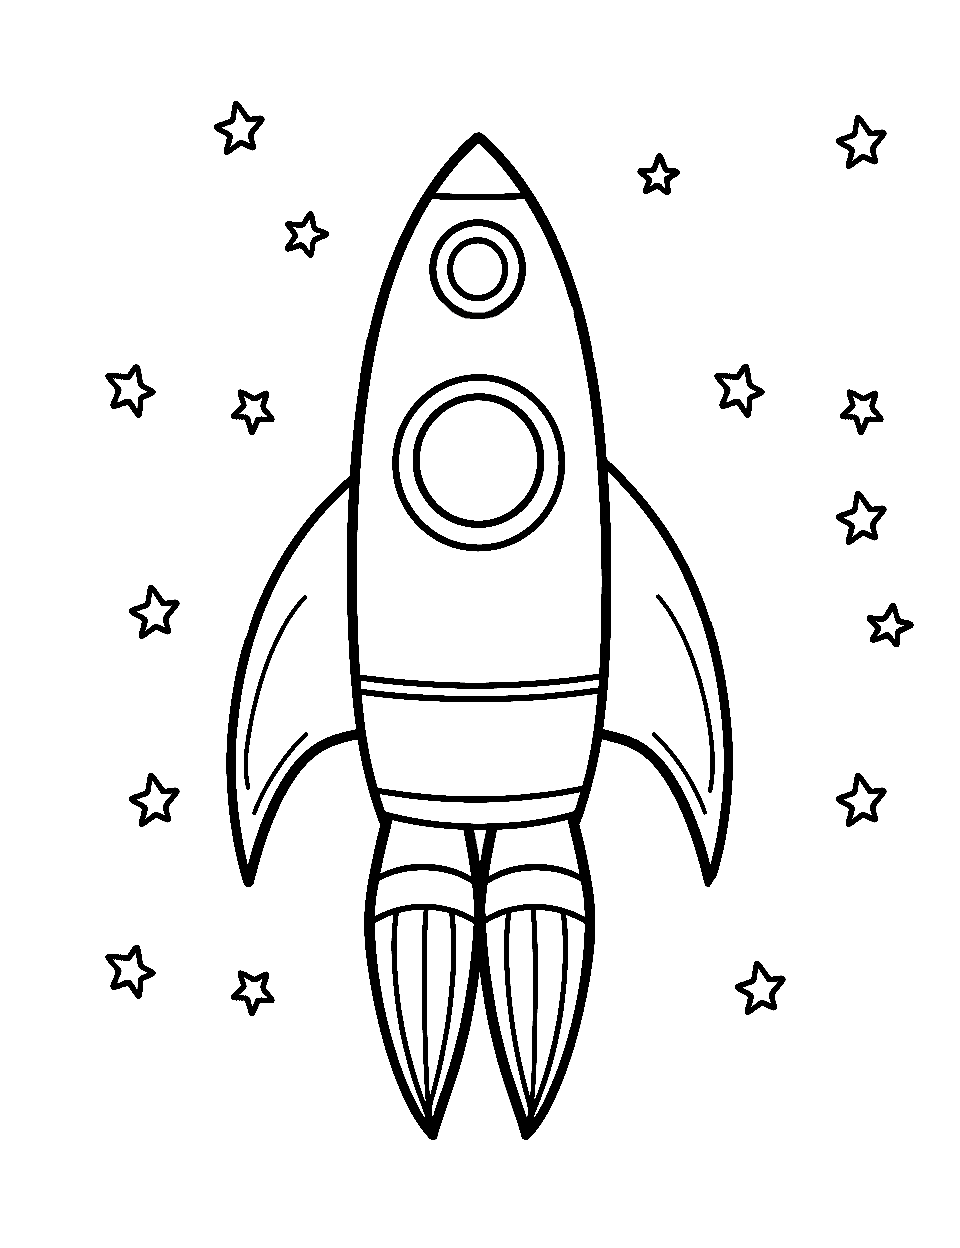 Easy-to-Color Rocket Coloring Page - A basic rocket design with simple shapes, perfect for young kids.